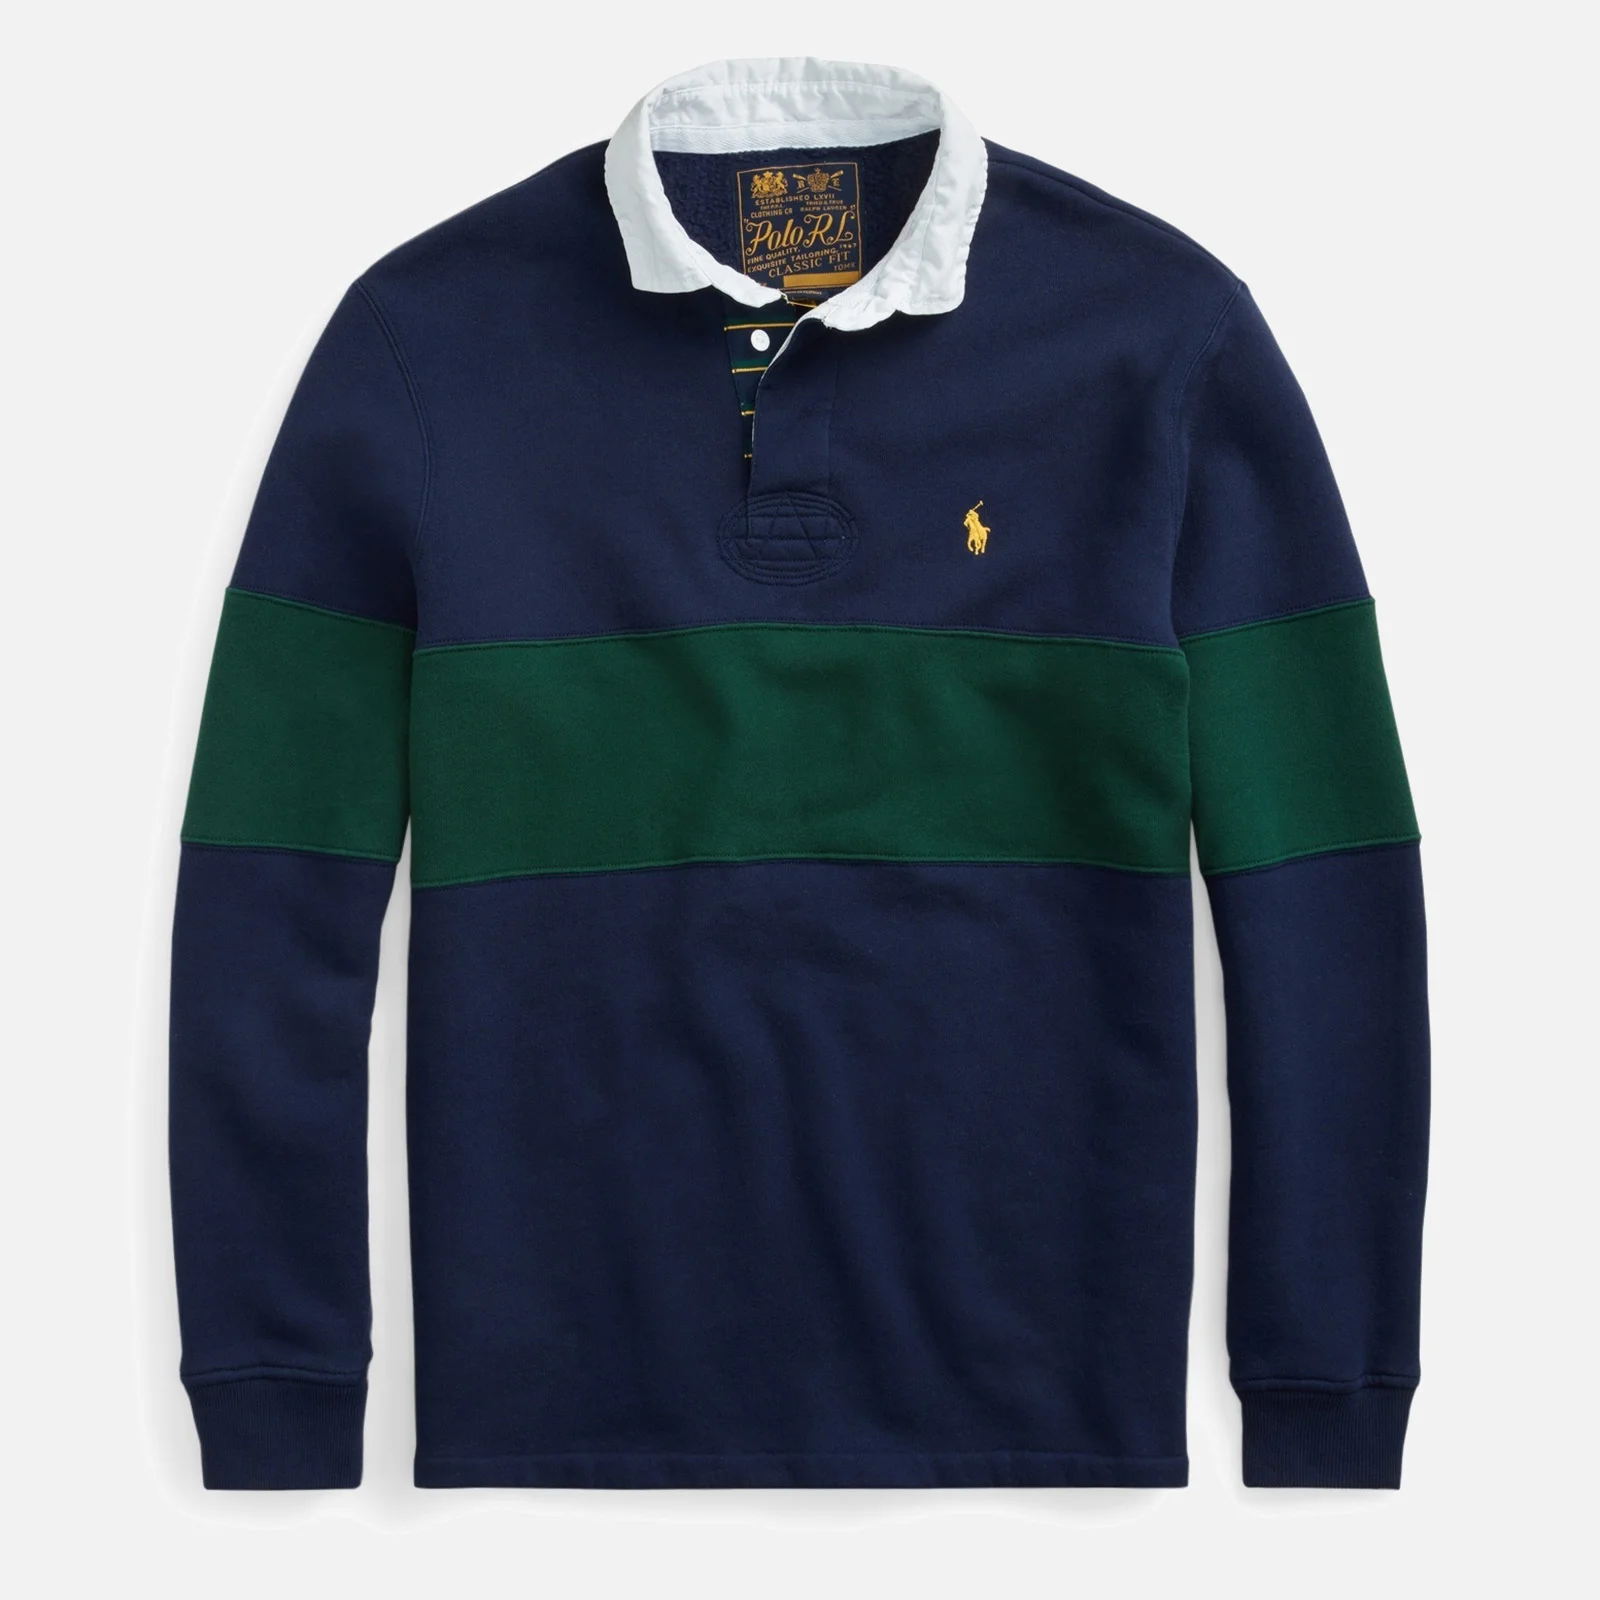 Polo Ralph Lauren Men's Long Sleeve Rugby Top - French Navy/College Green Image 1